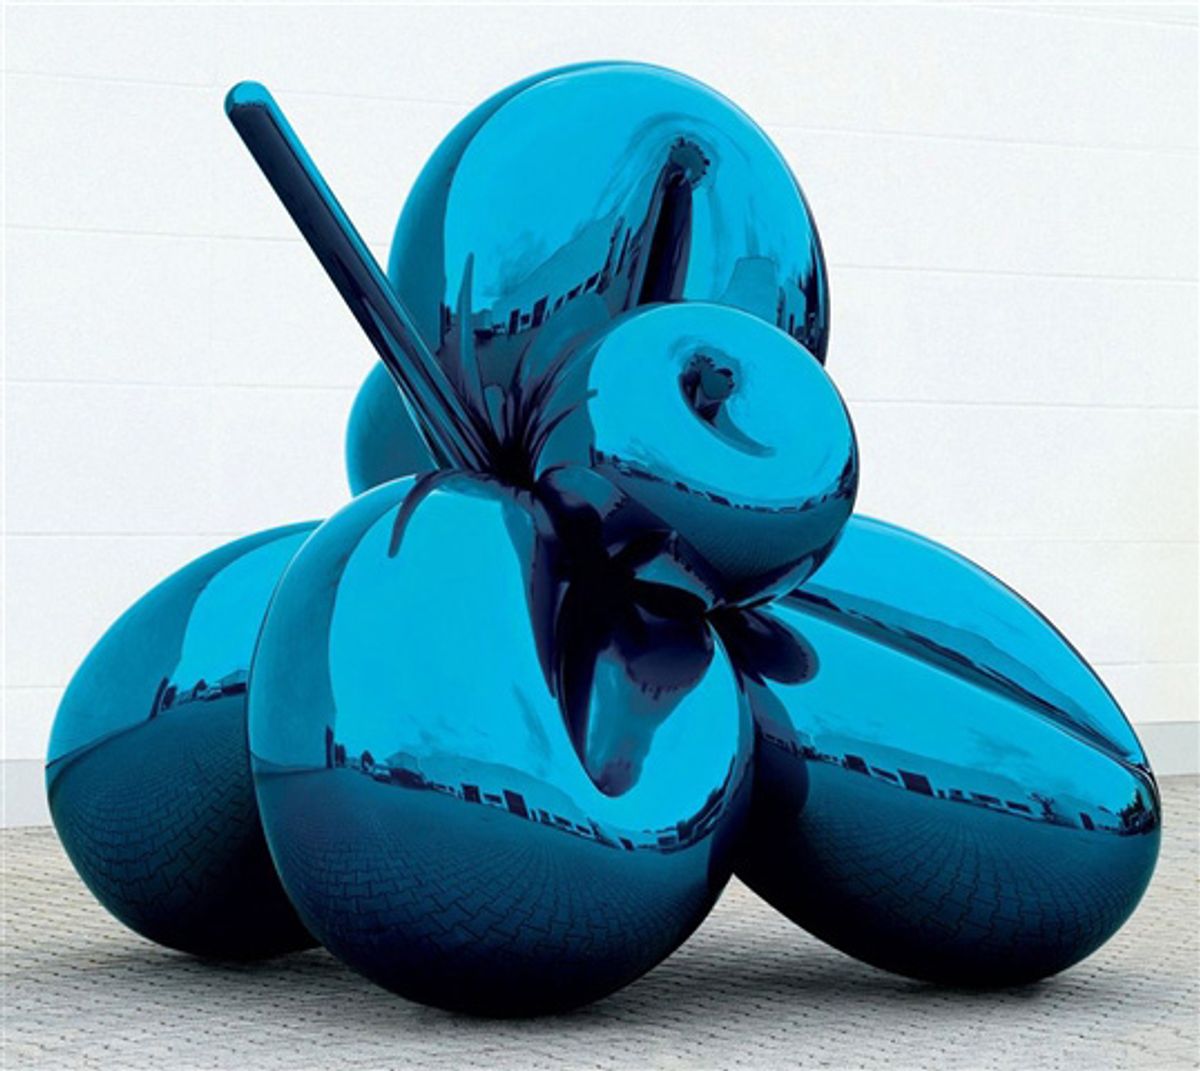 Jeff Koons, Balloon Flower (Blue), 1995-2000, hammered $1m below its $16m high estimate at Christie’s ($16.9m with premium)—far short of the $25.8m that its twin, Balloon Flower (Magenta) fetched at auction two years ago 